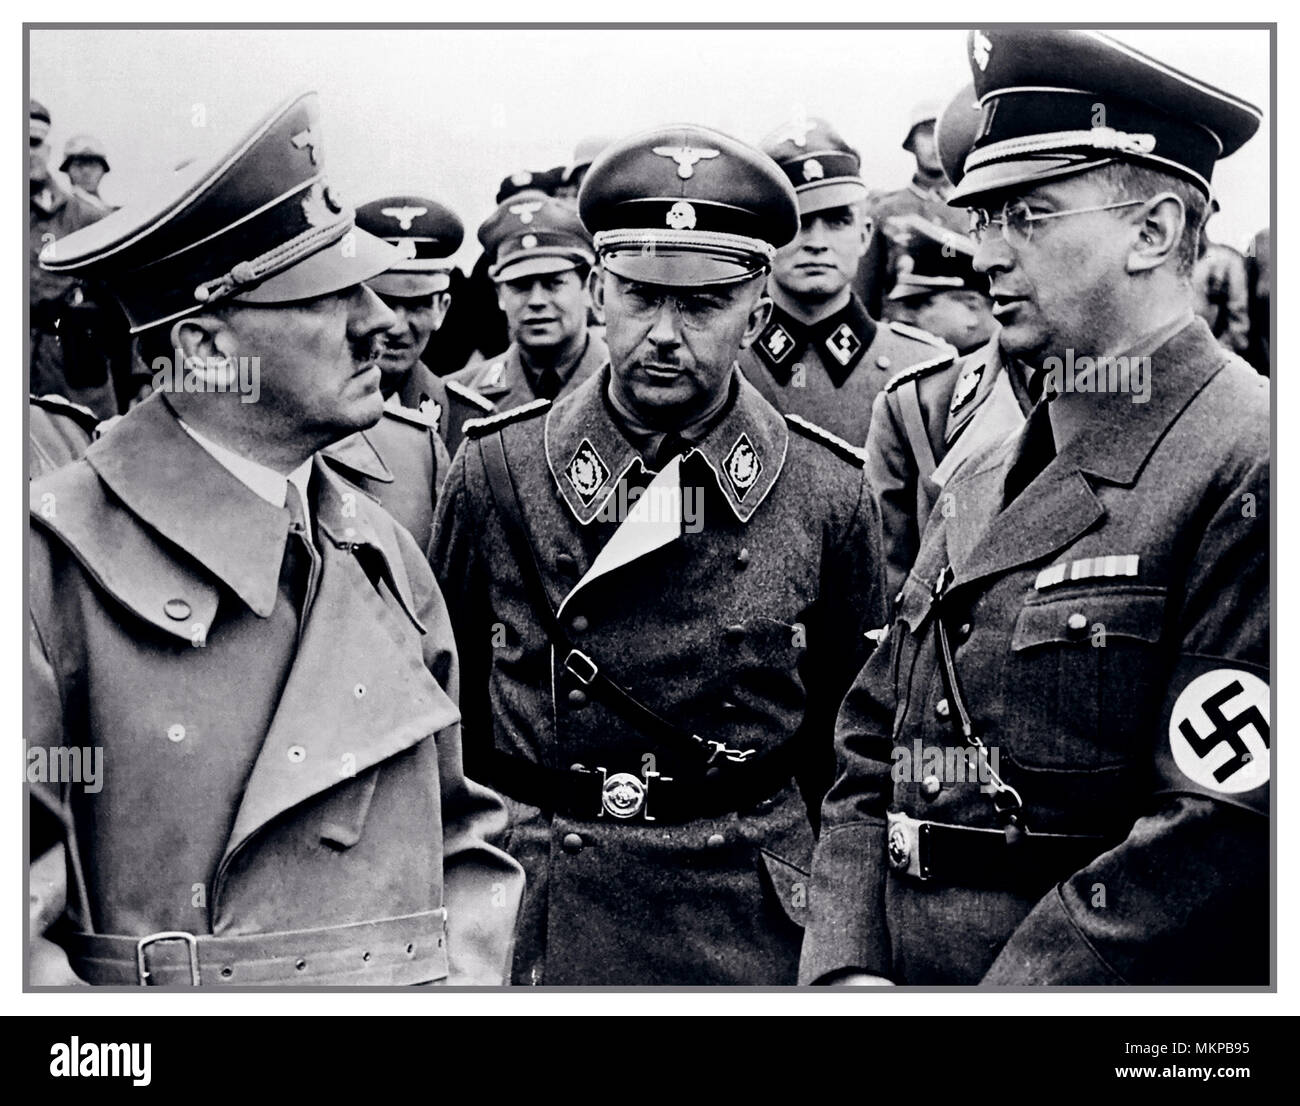 HITLER, HIMMLER, HENLEIN, Vintage WW2 1940's  B&W image of Adolf Hitler leader of the Nazi Party (Nationalsozialistische Deutsche Arbeiterpartei; NSDAP), Chancellor of Germany from 1933 to 1945 and Führer ("Leader") of Nazi Germany from 1934 to 1945  Heinrich Himmler Reichsführer of the Schutzstaffel (Protection Squadron; Waffen SS), and a leading member of the Nazi Party (NSDAP) of German & Konrad Henlein Reichsstatthalter and Gauleiter of the Reichsgau Sudetenland wearing a swastika armband. All in uniform standing talking, with SS officers grouped behind Stock Photo